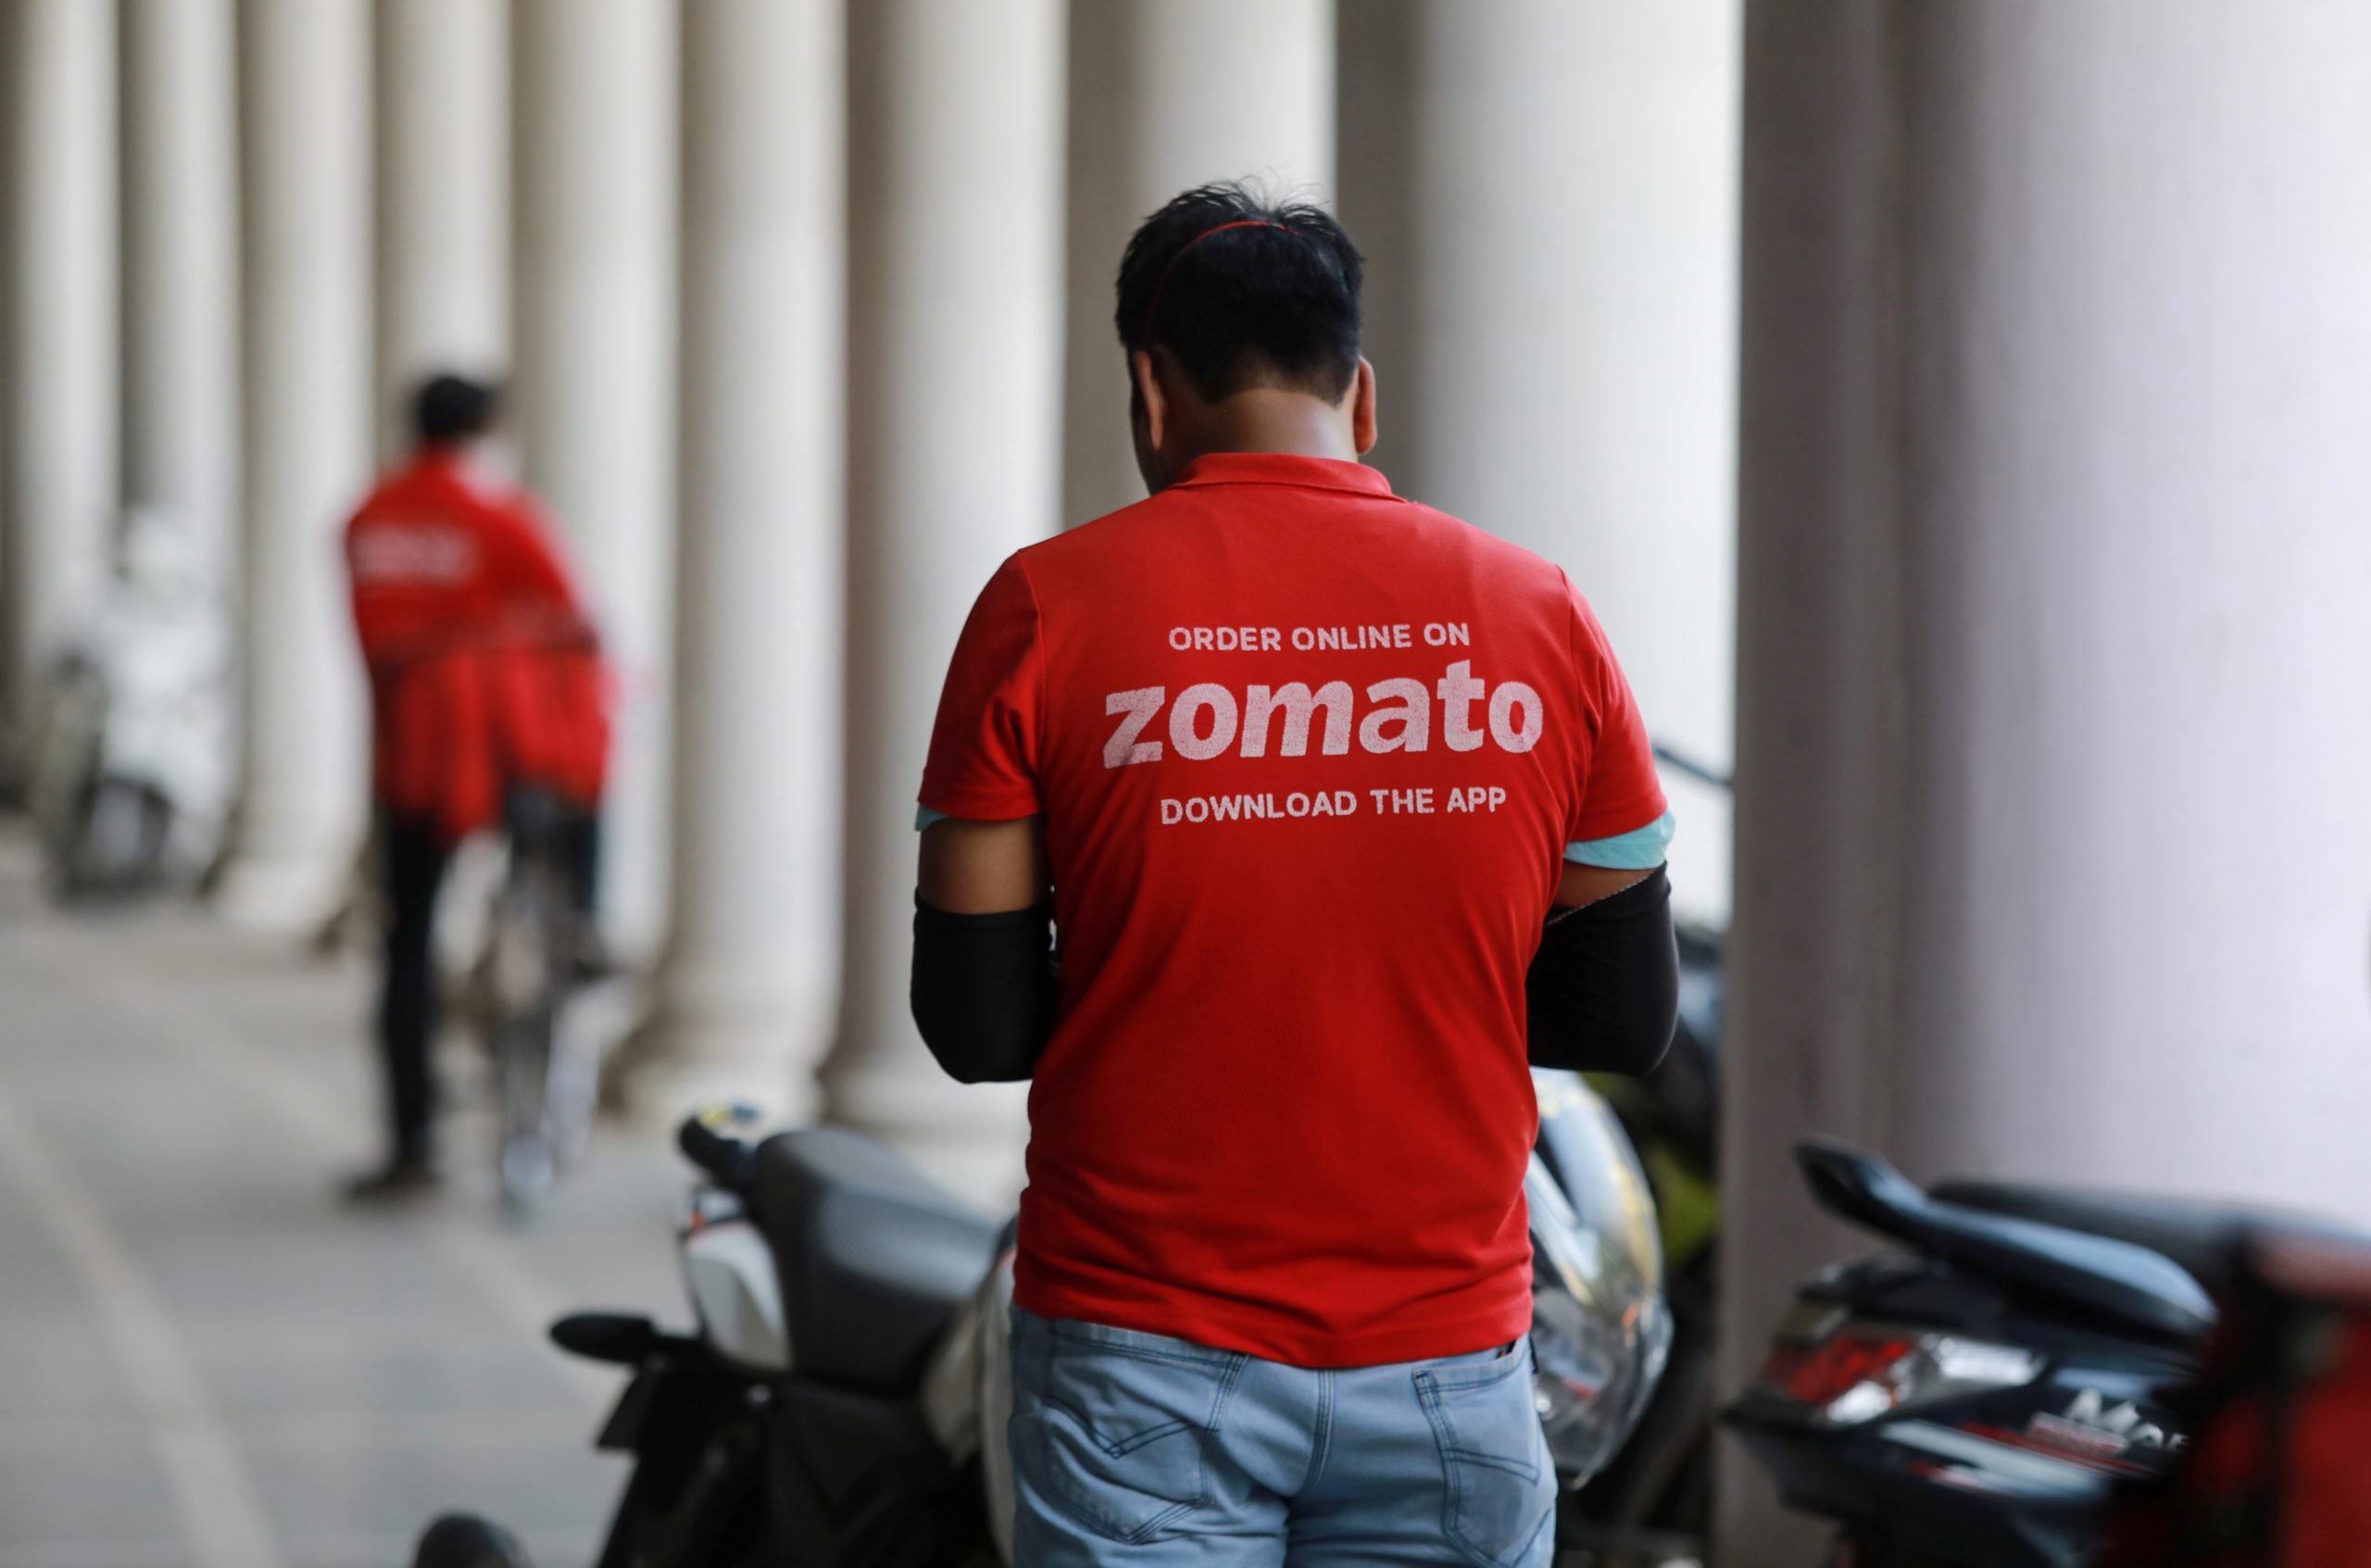 Over 2% stake in Zomato sold in block deal, SoftBank likely seller